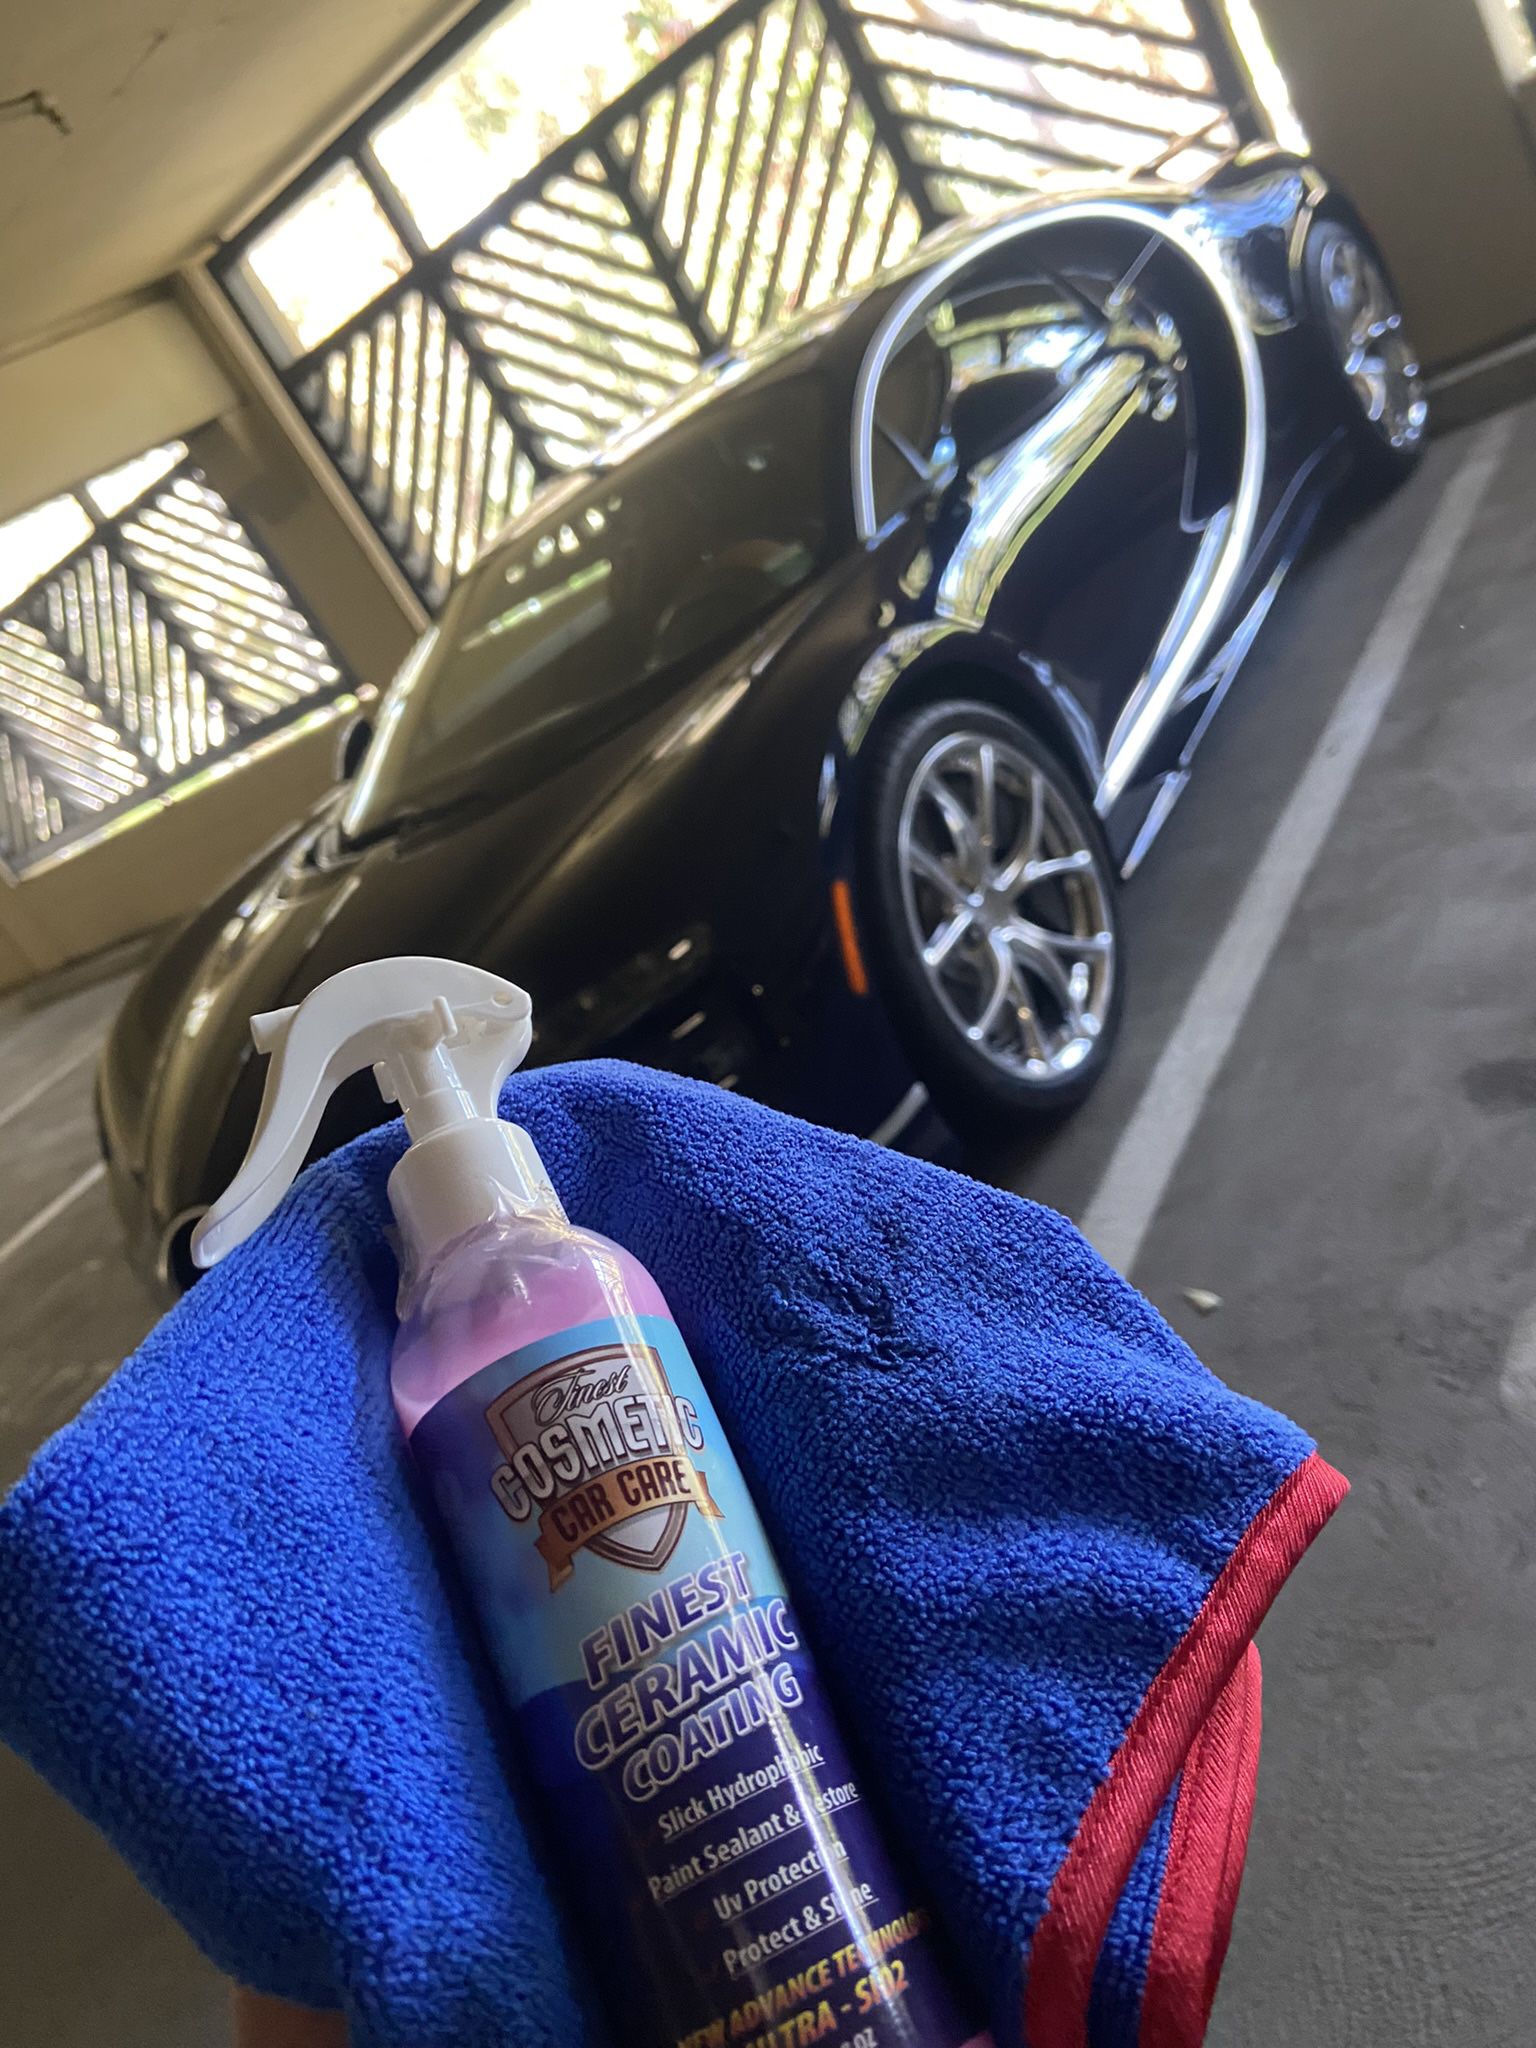 Ceramic Car Coating Hydrophobic Spray 120 Ml for Sale in Lakewood, CA -  OfferUp